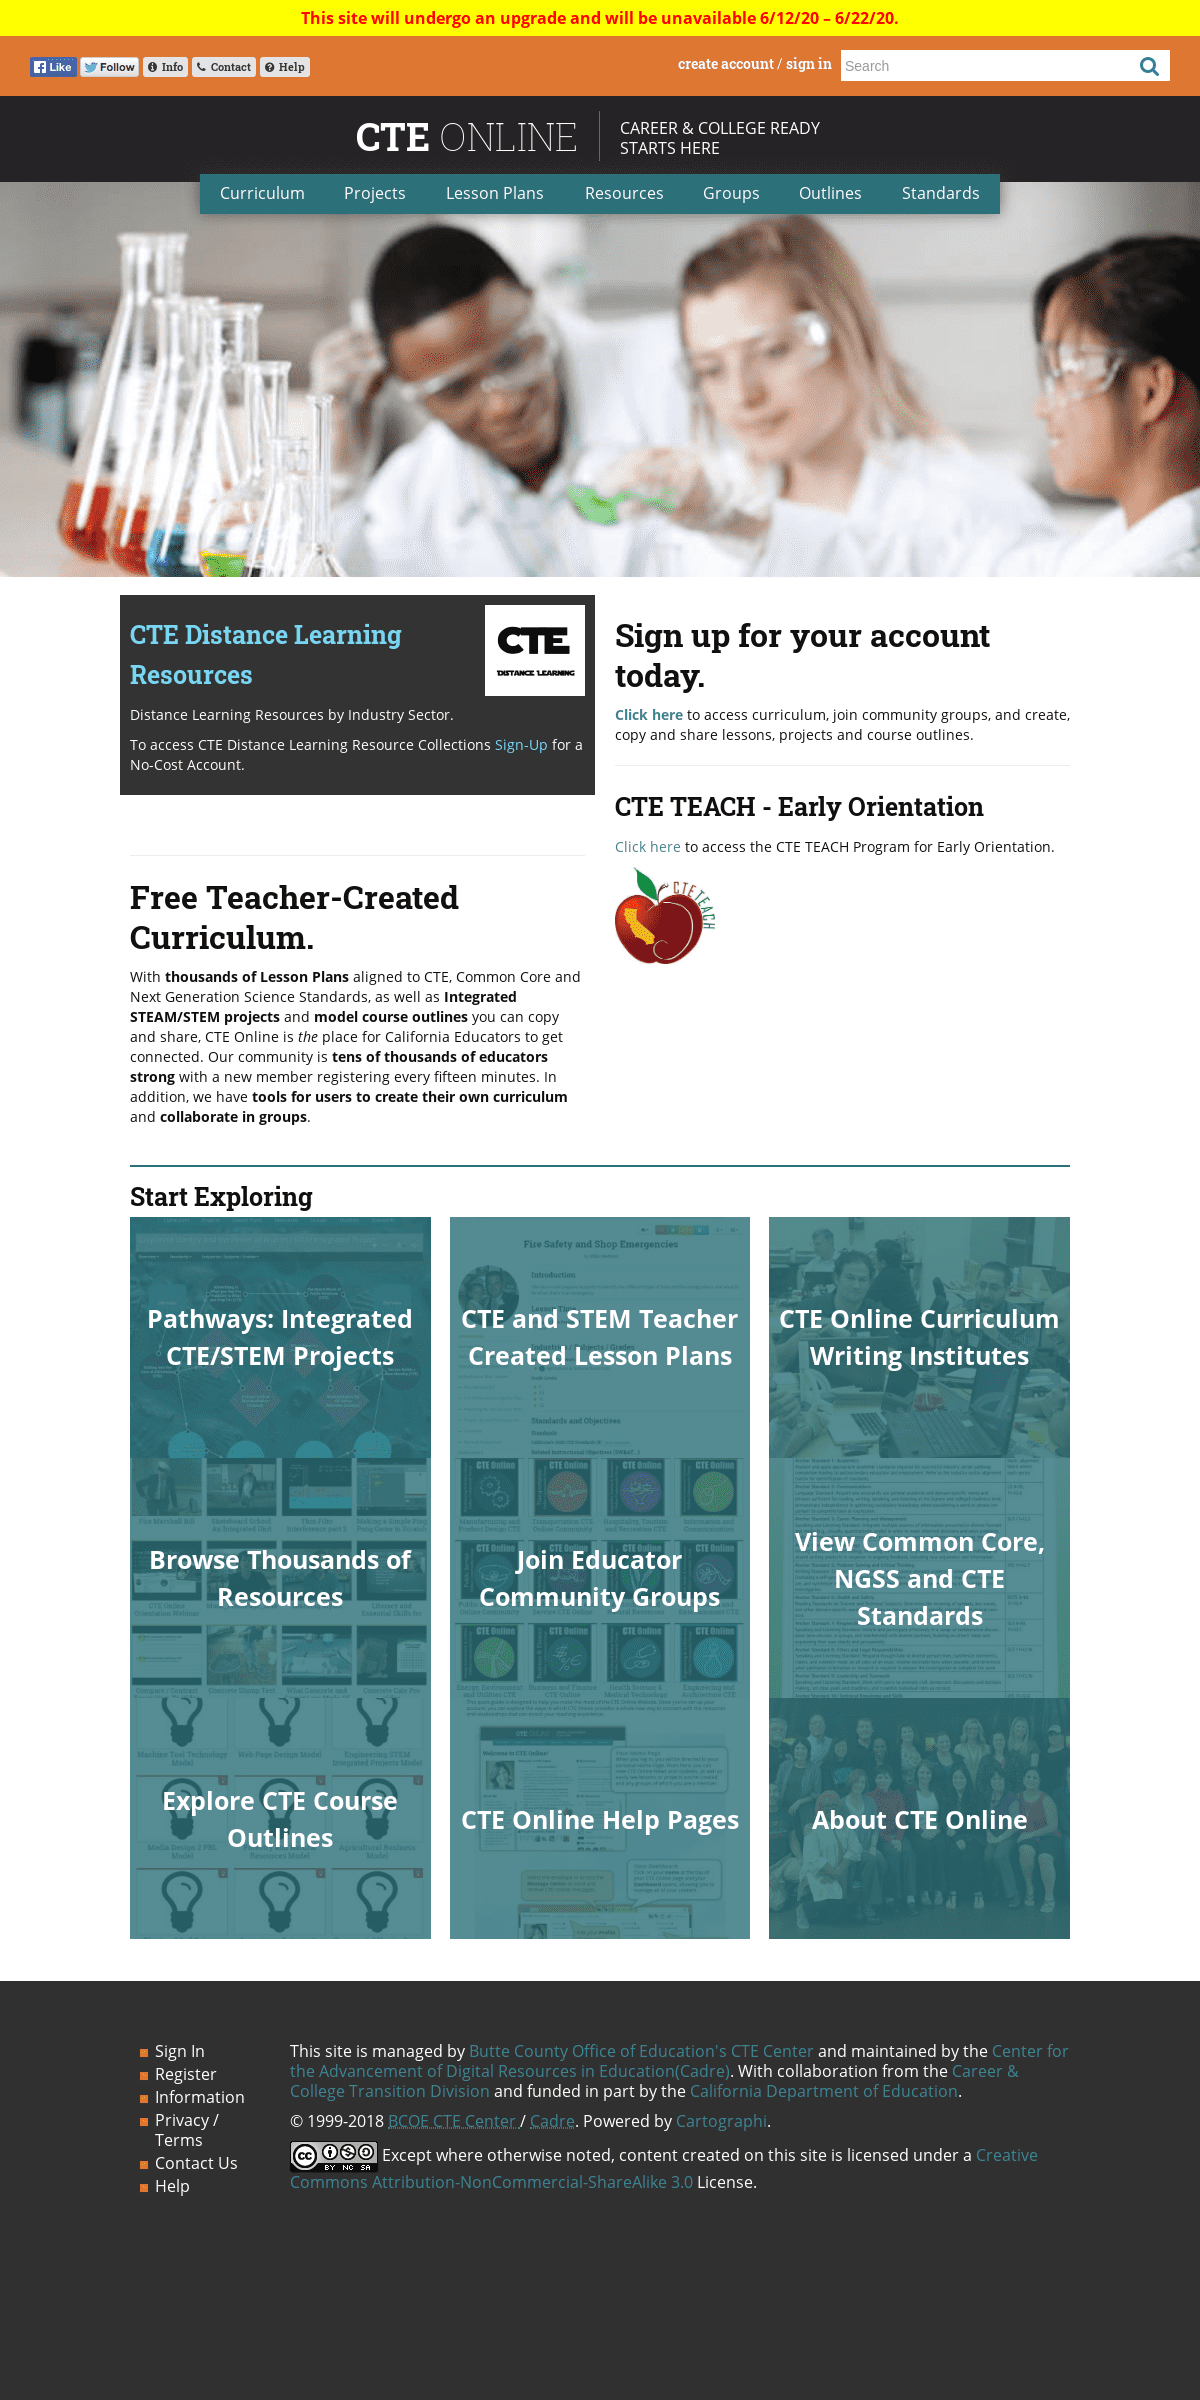 A complete backup of cteonline.org